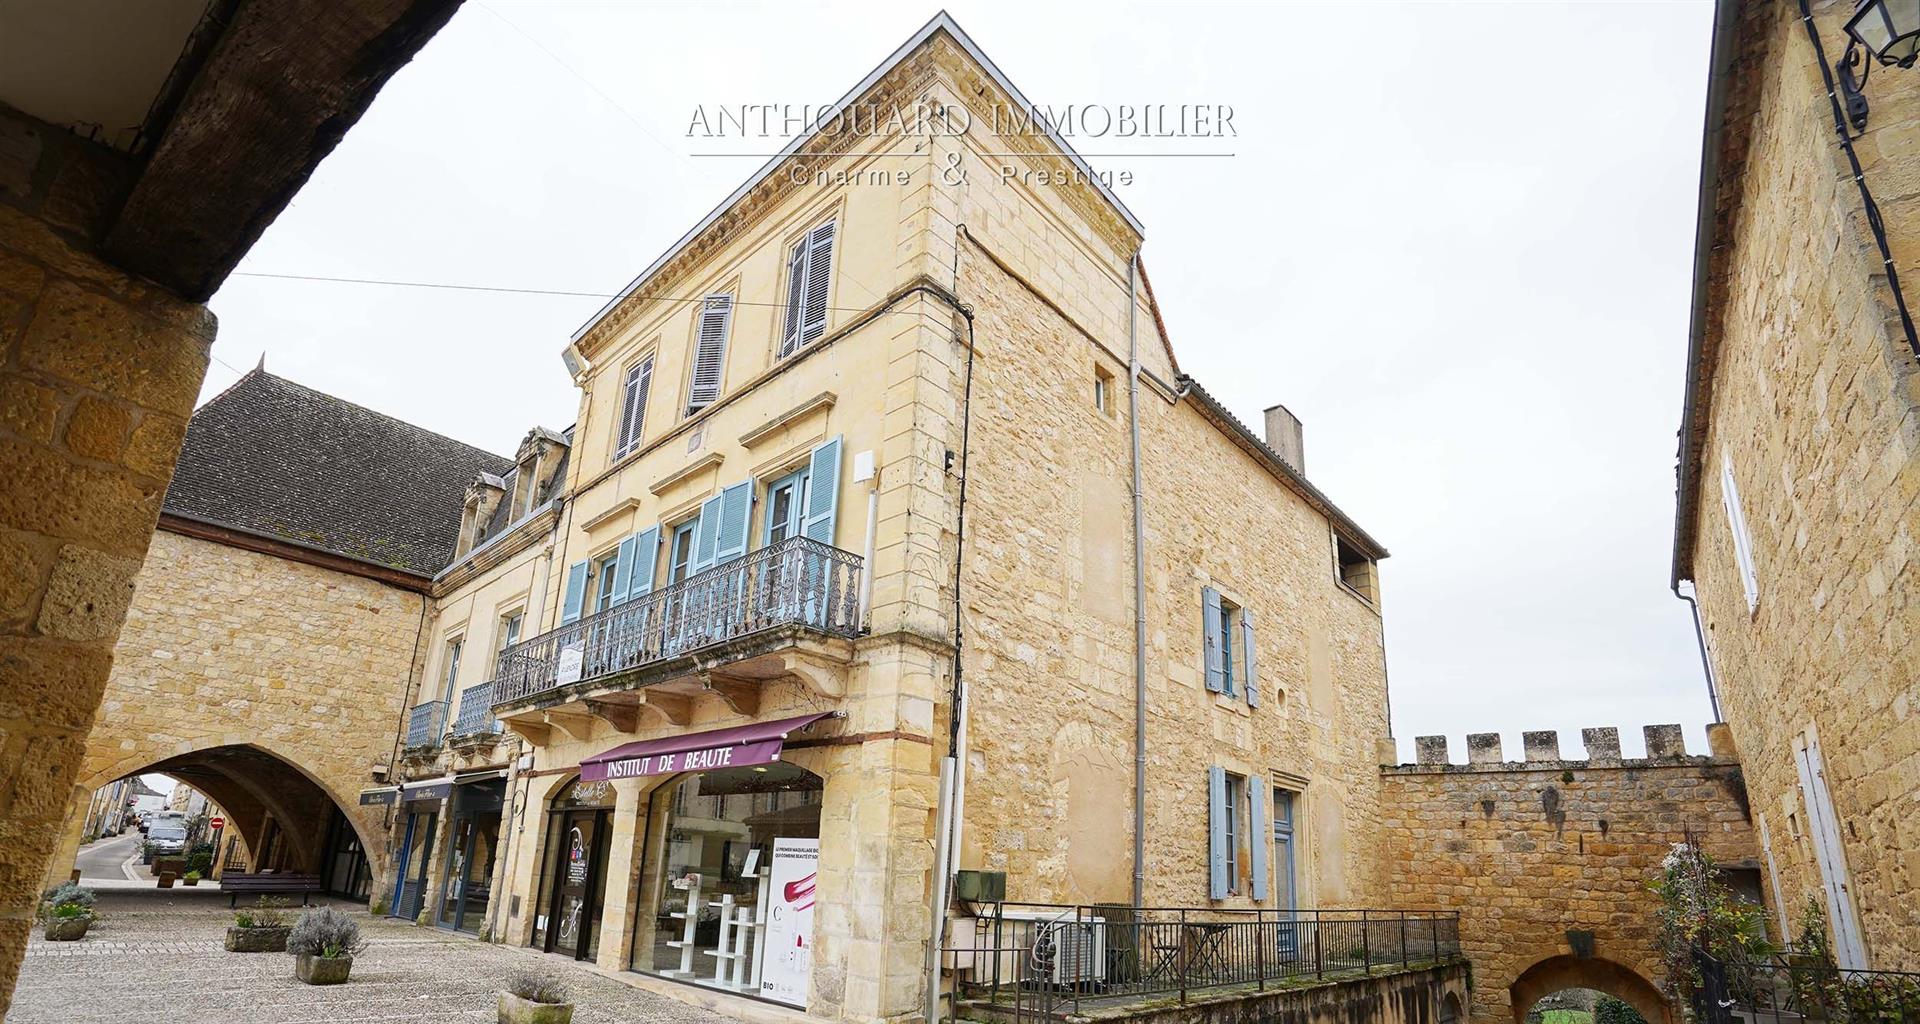 17th century building, in the heart of the bastide